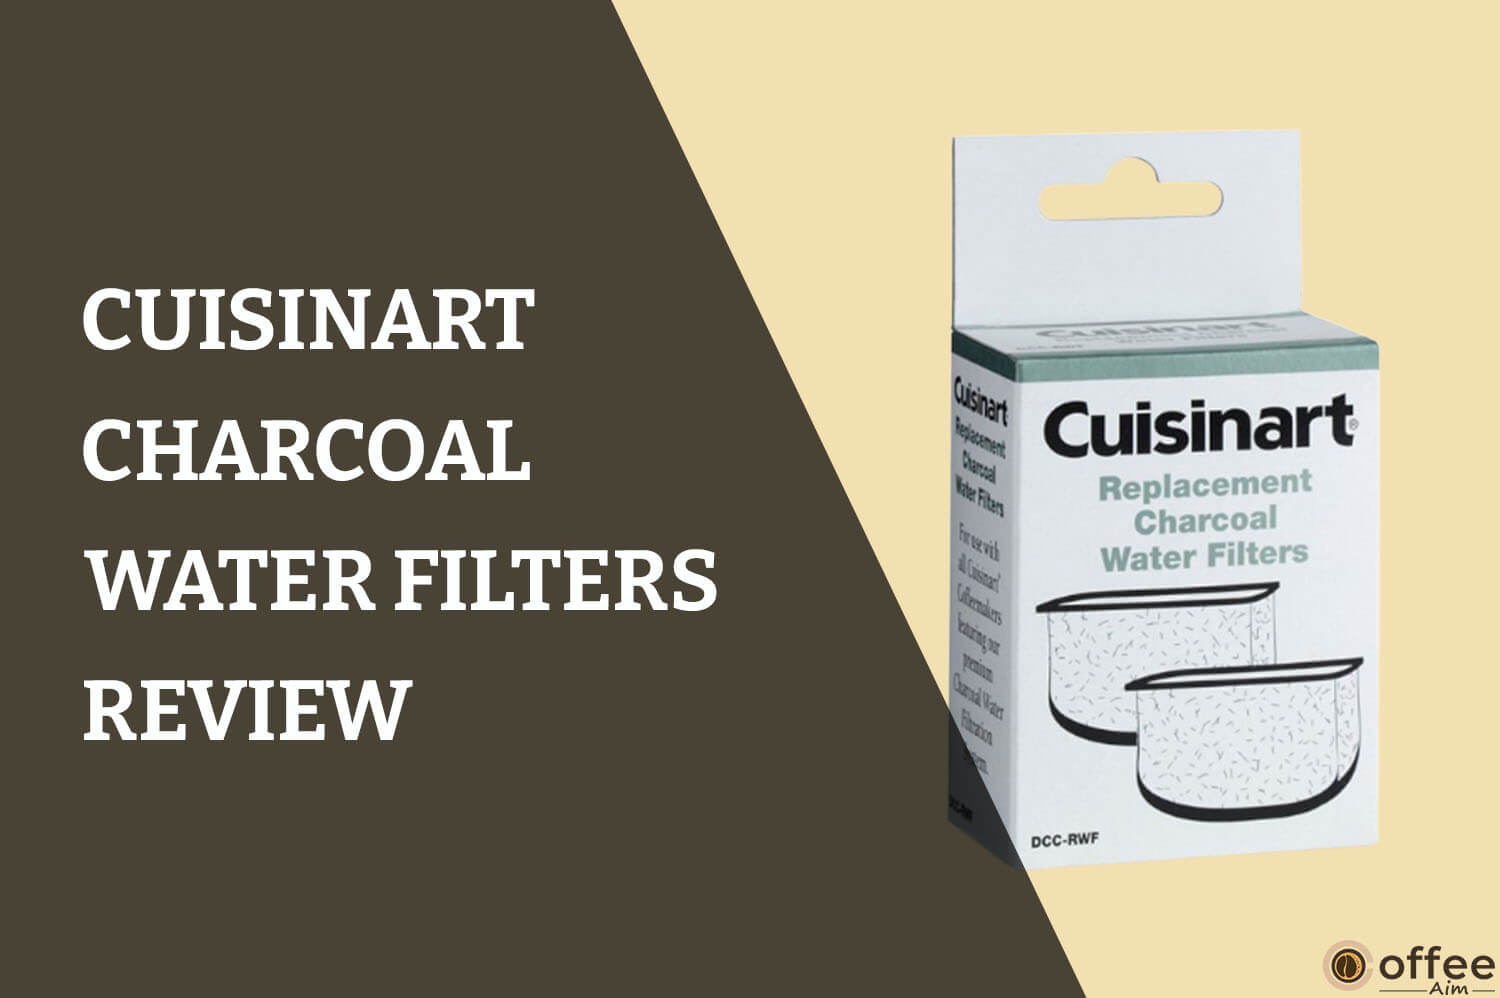 Feature image for the article "Cuisinart Charcoal Water Filters Review"